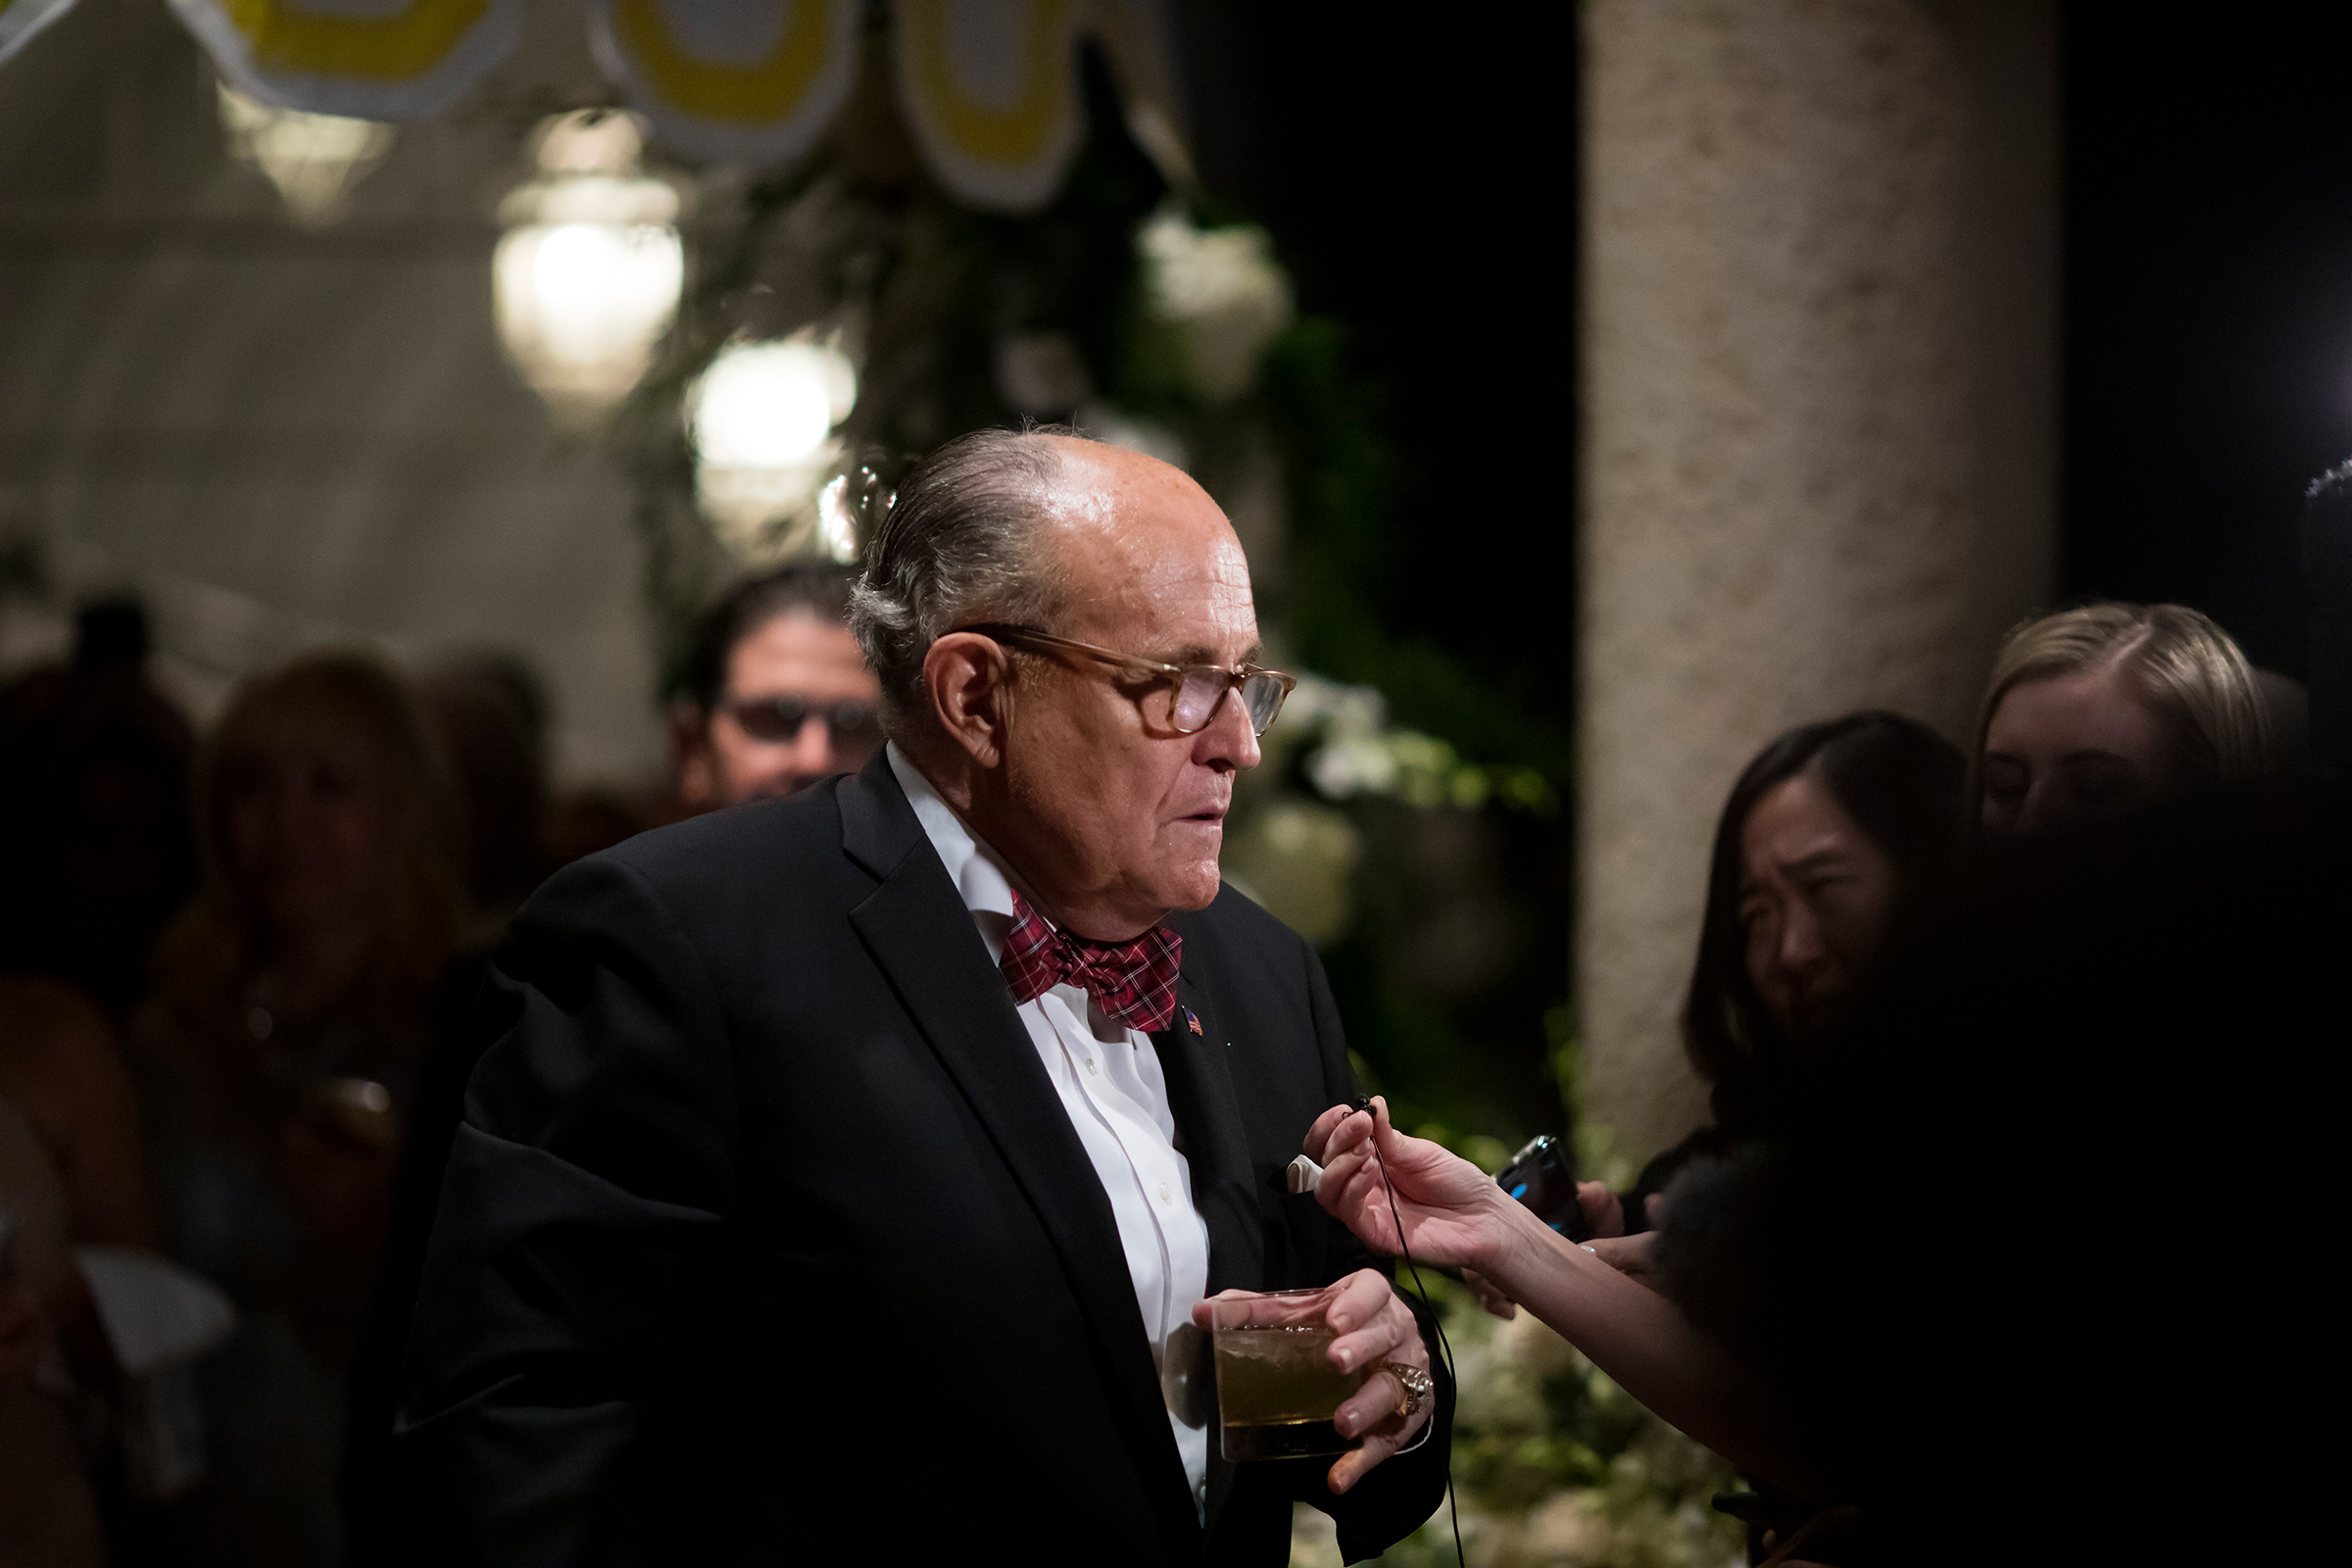 Rudy Giuliani, President Donald Trump's personal lawyer, speaks to reporters at the Mar-a-Lago resort in Palm Beach, Fla., on Dec. 31, 2019. (Eric Thayer—The New York Times/Redux)